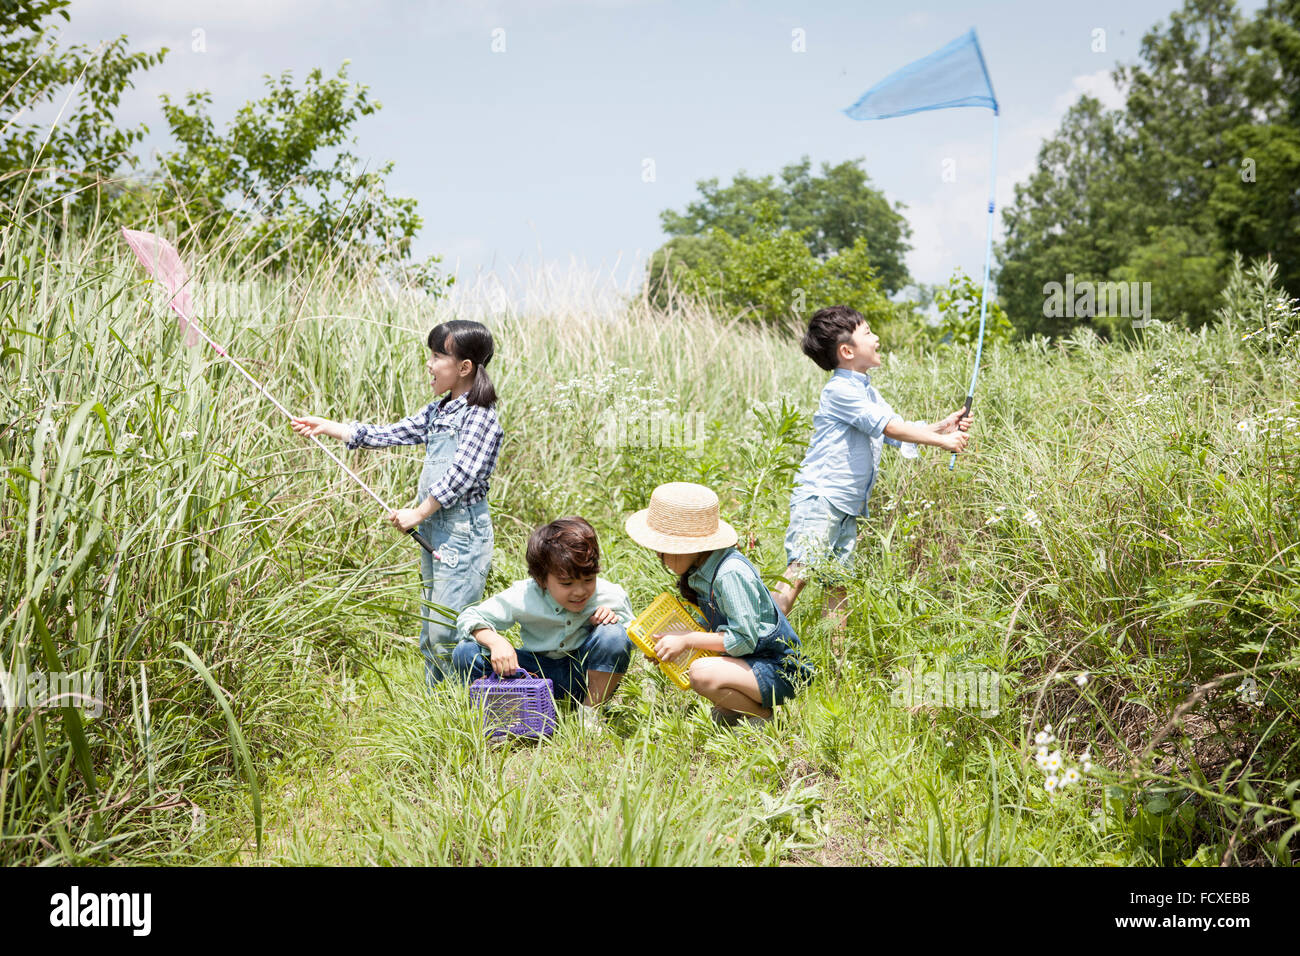 https://c8.alamy.com/comp/FCXEBB/four-kids-having-fun-at-the-grass-field-with-butterfly-nets-and-collecting-FCXEBB.jpg